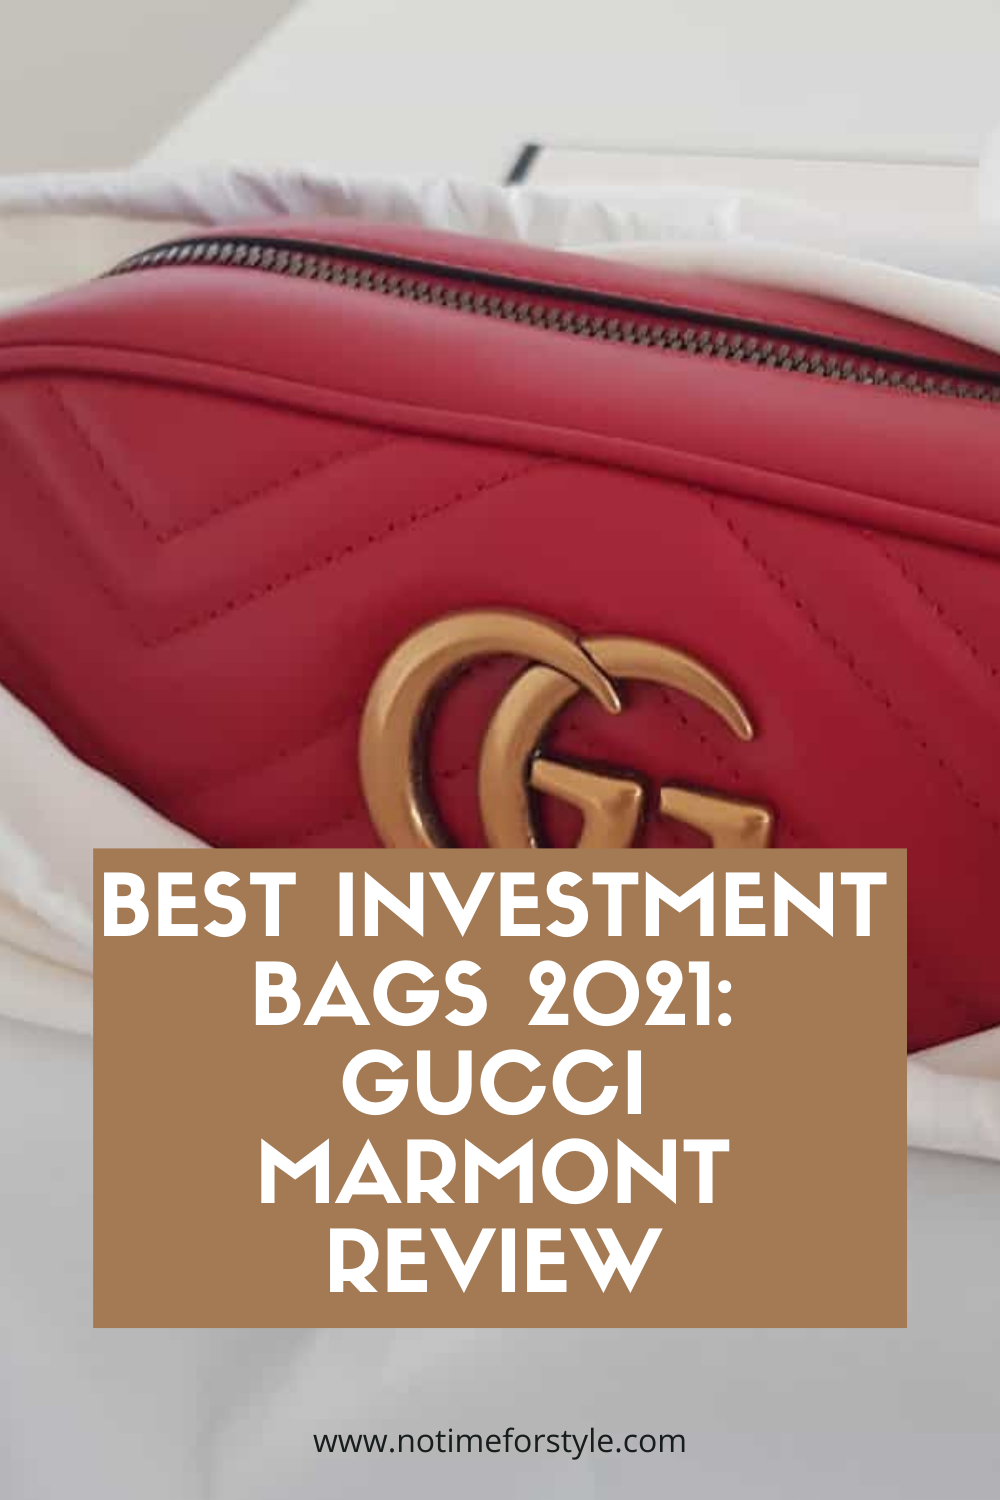 Gucci Marmont Review 